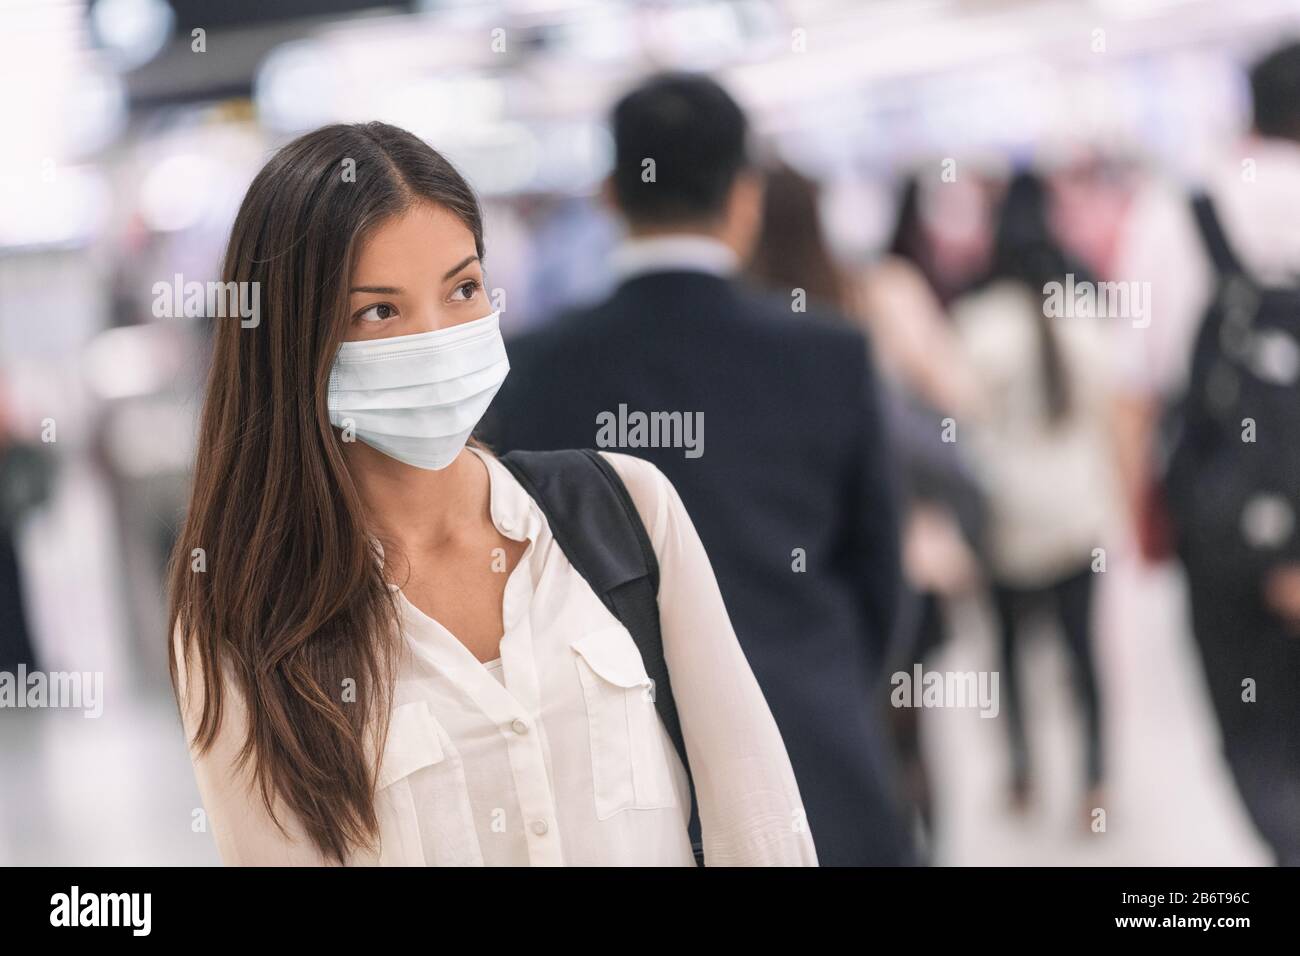 Virus mask Asian woman travel wearing face protection in prevention for coronavirus in China. Lady walking in public space bus station or airport. Stock Photo